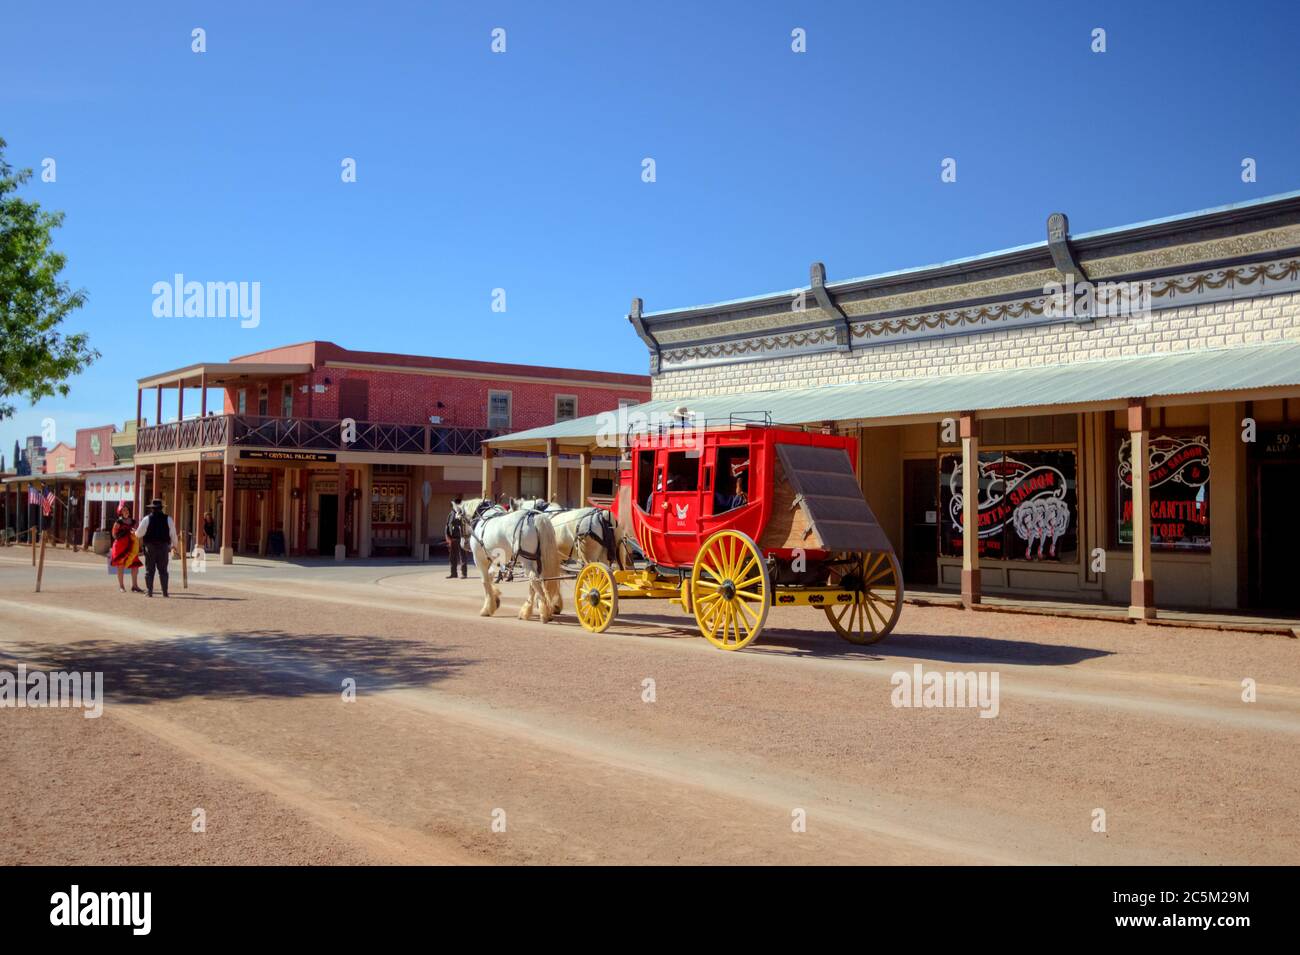 Tombstone, Arizona, USA - May 1, 2019: Stagecoach and Wild West style storefront facades on the streets of historic Tombstone. Stock Photo